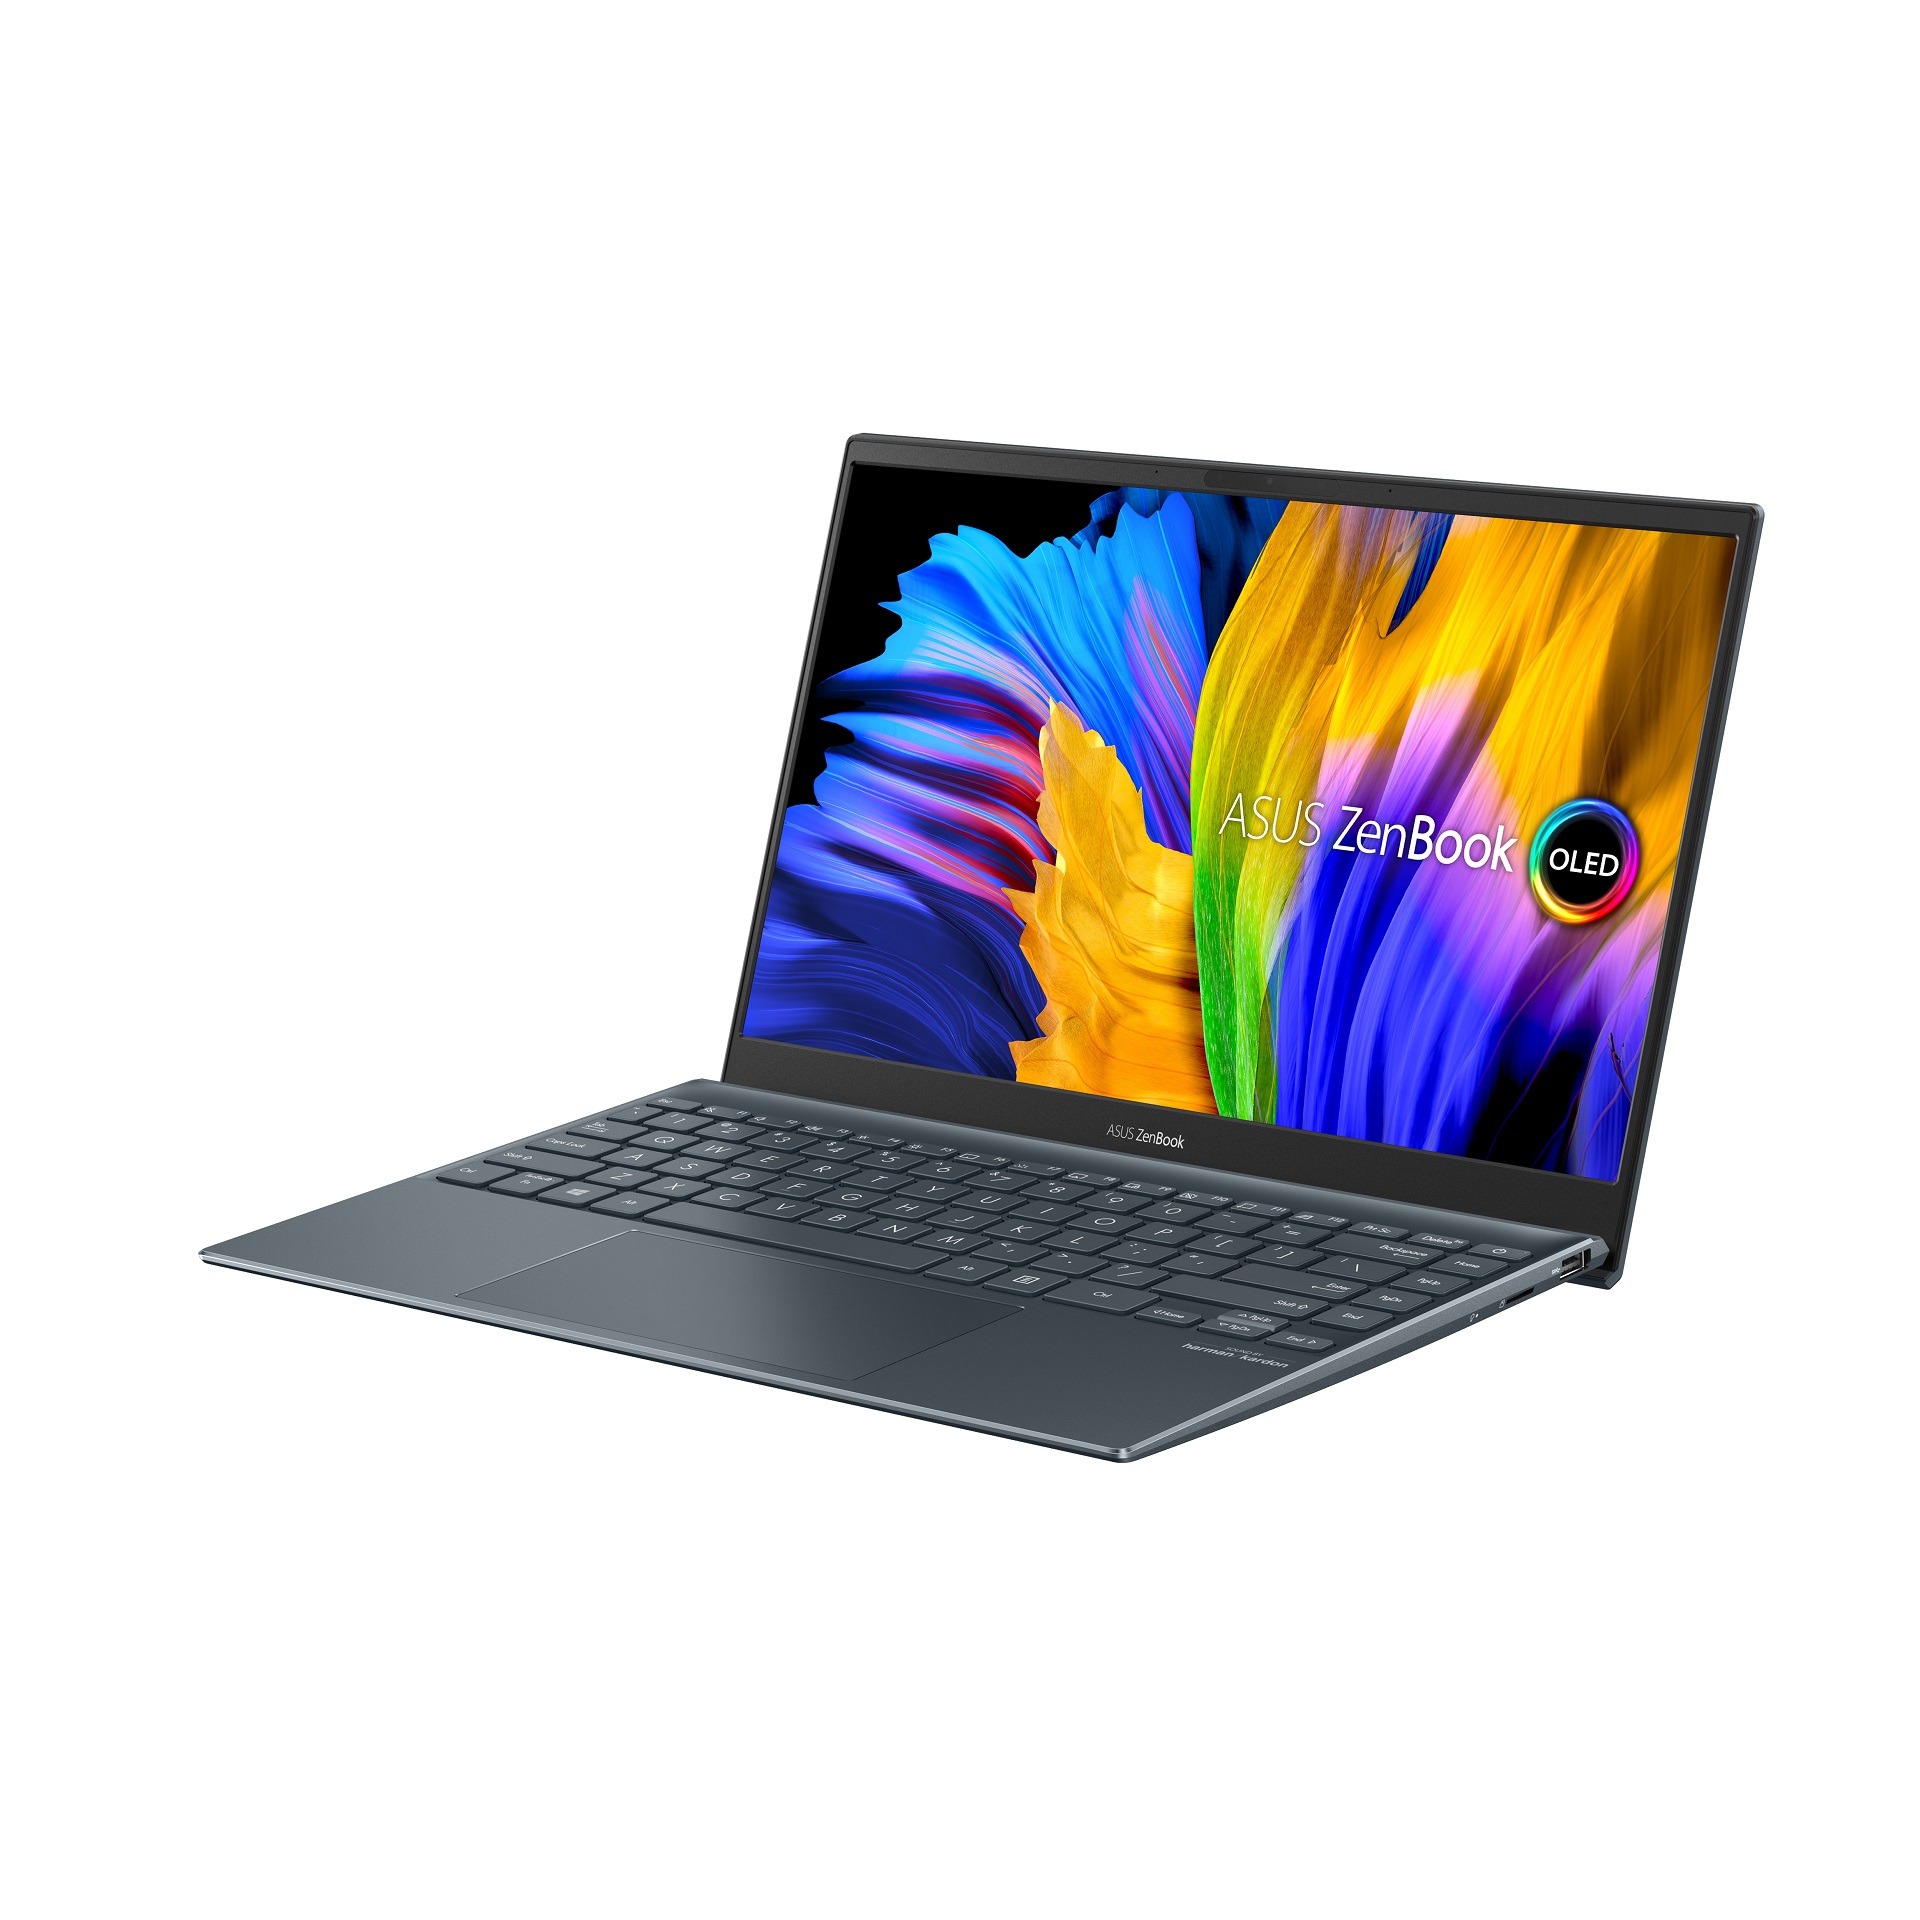 ASUS introduces two new OLED ZenBook laptops 